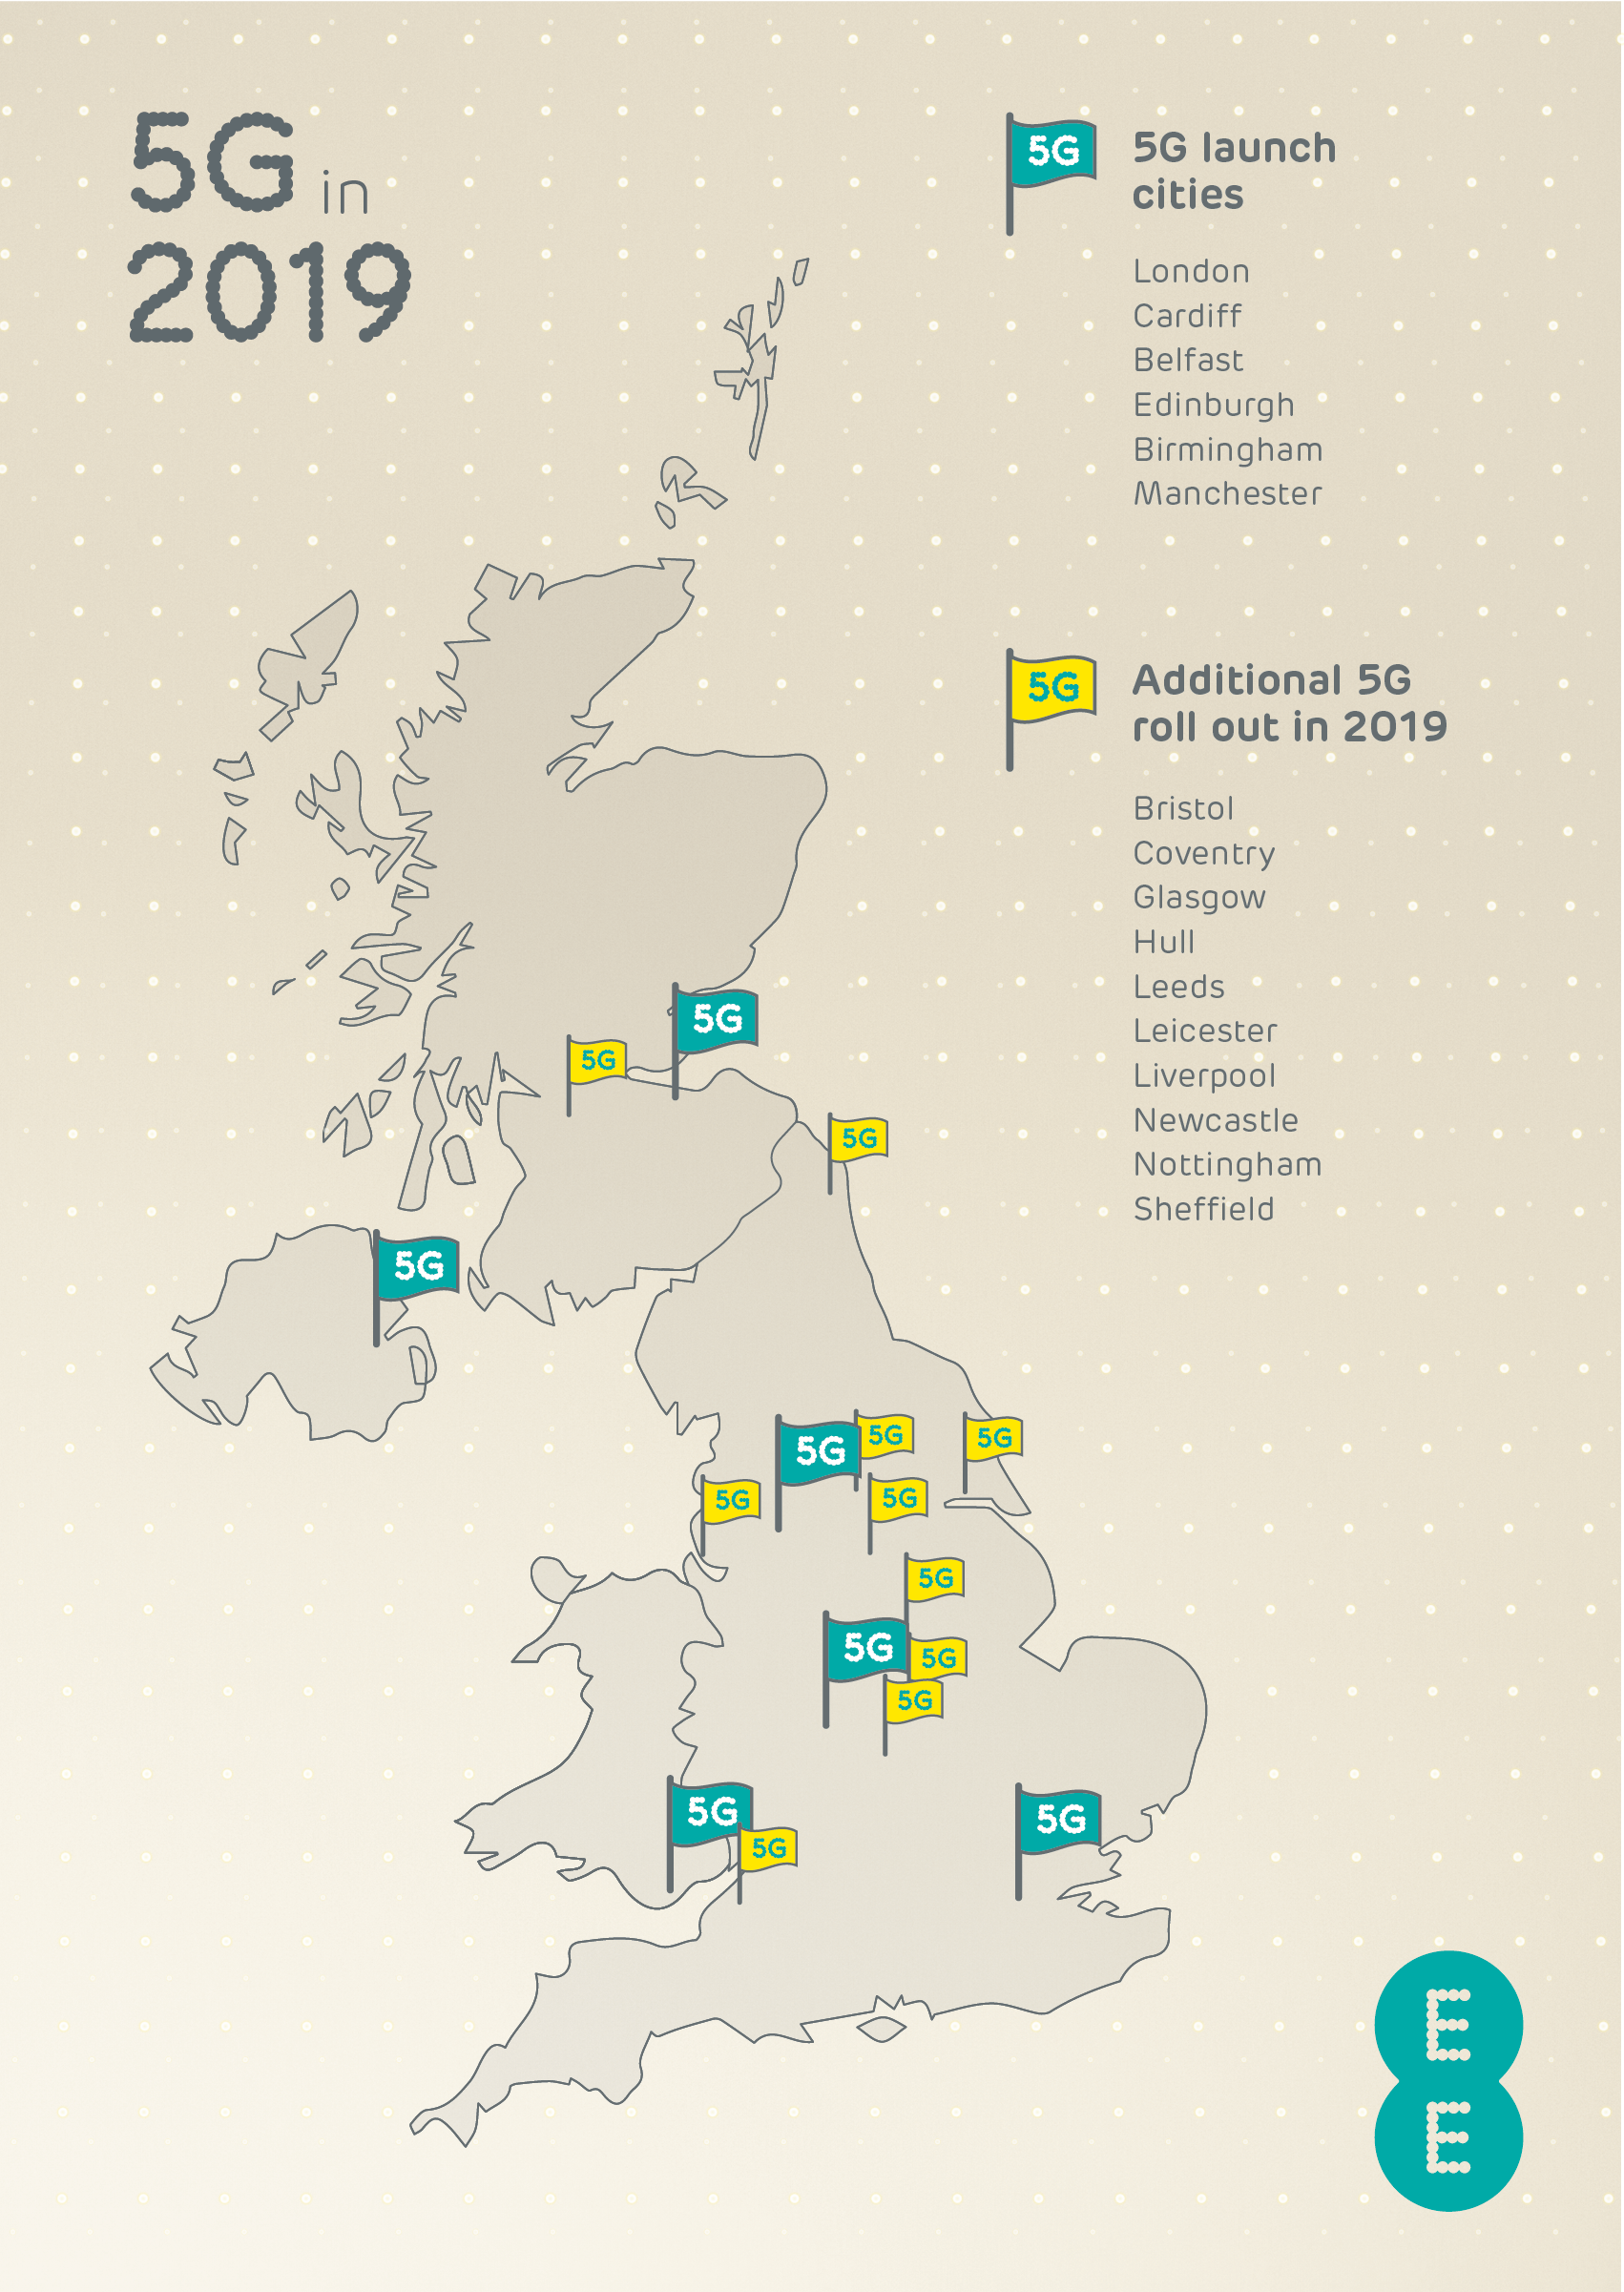 EE has confirmed the first UK 5G cities